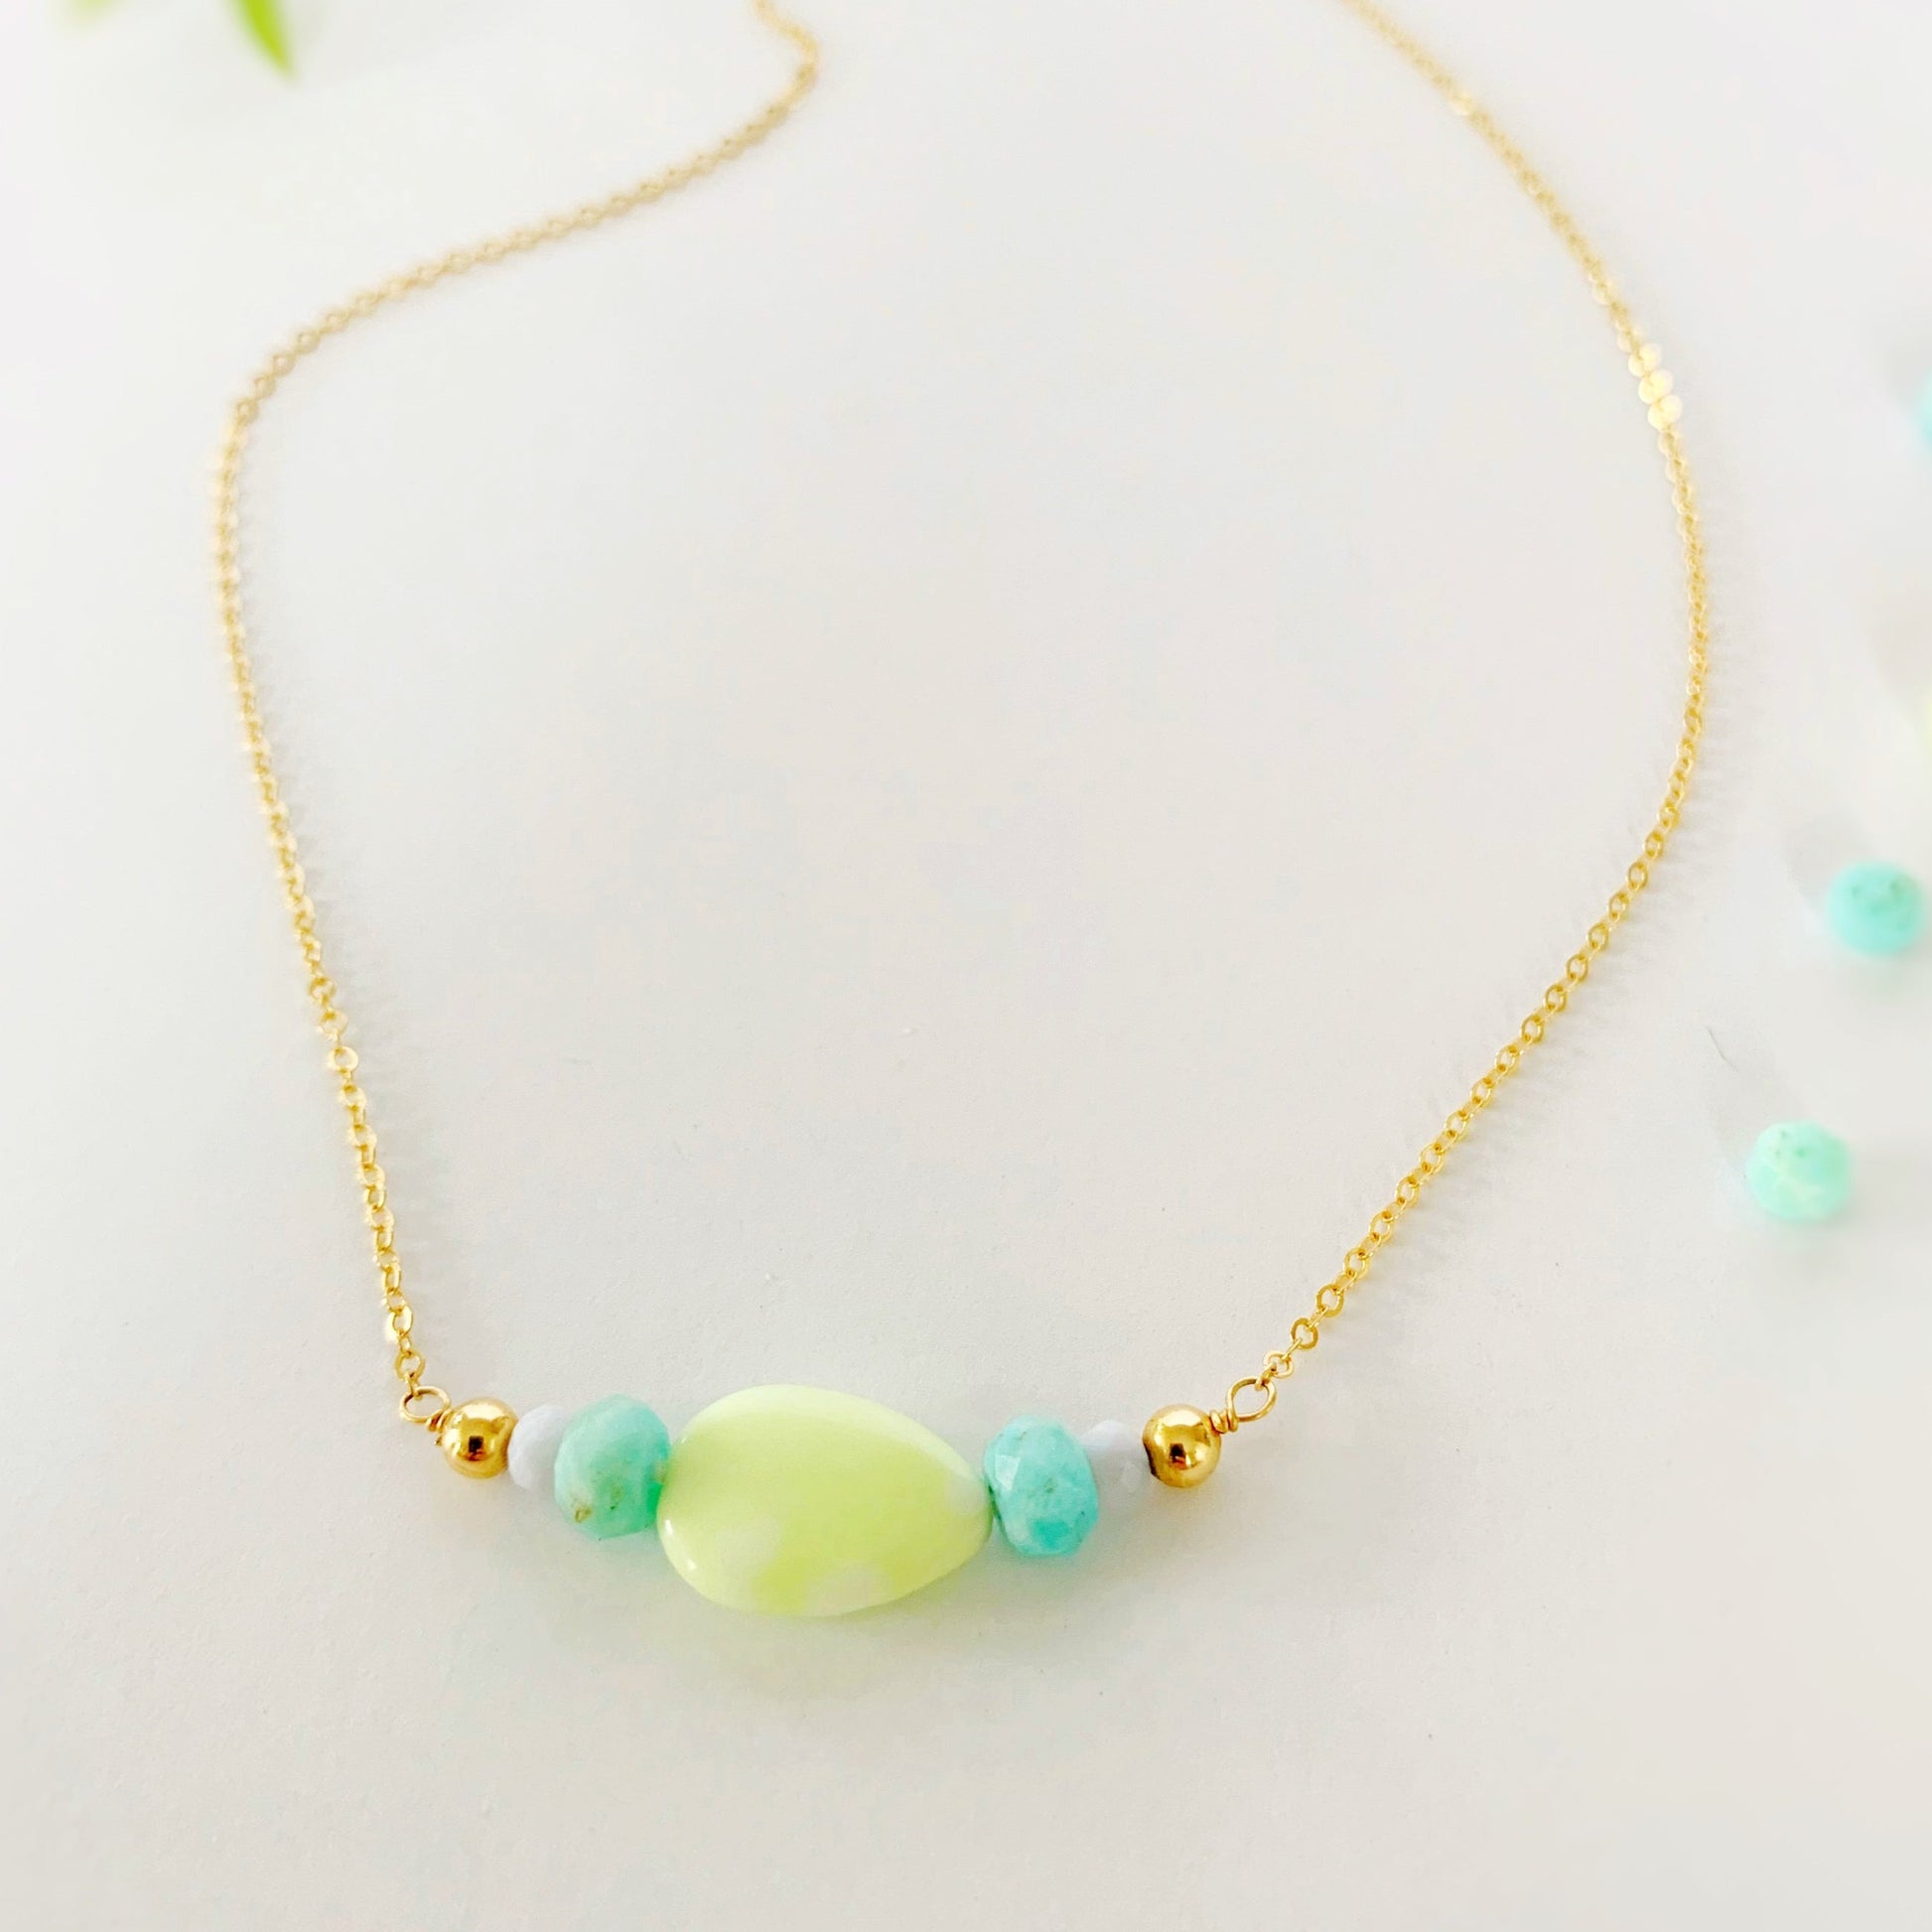 The captiva necklace is designed with 14k gold filled chain with a center segment of beads including a teardrop shaped lime jade, with amazonite and blue lace agate faceted rondelles on either side. This necklace is photographed flat on a white surface